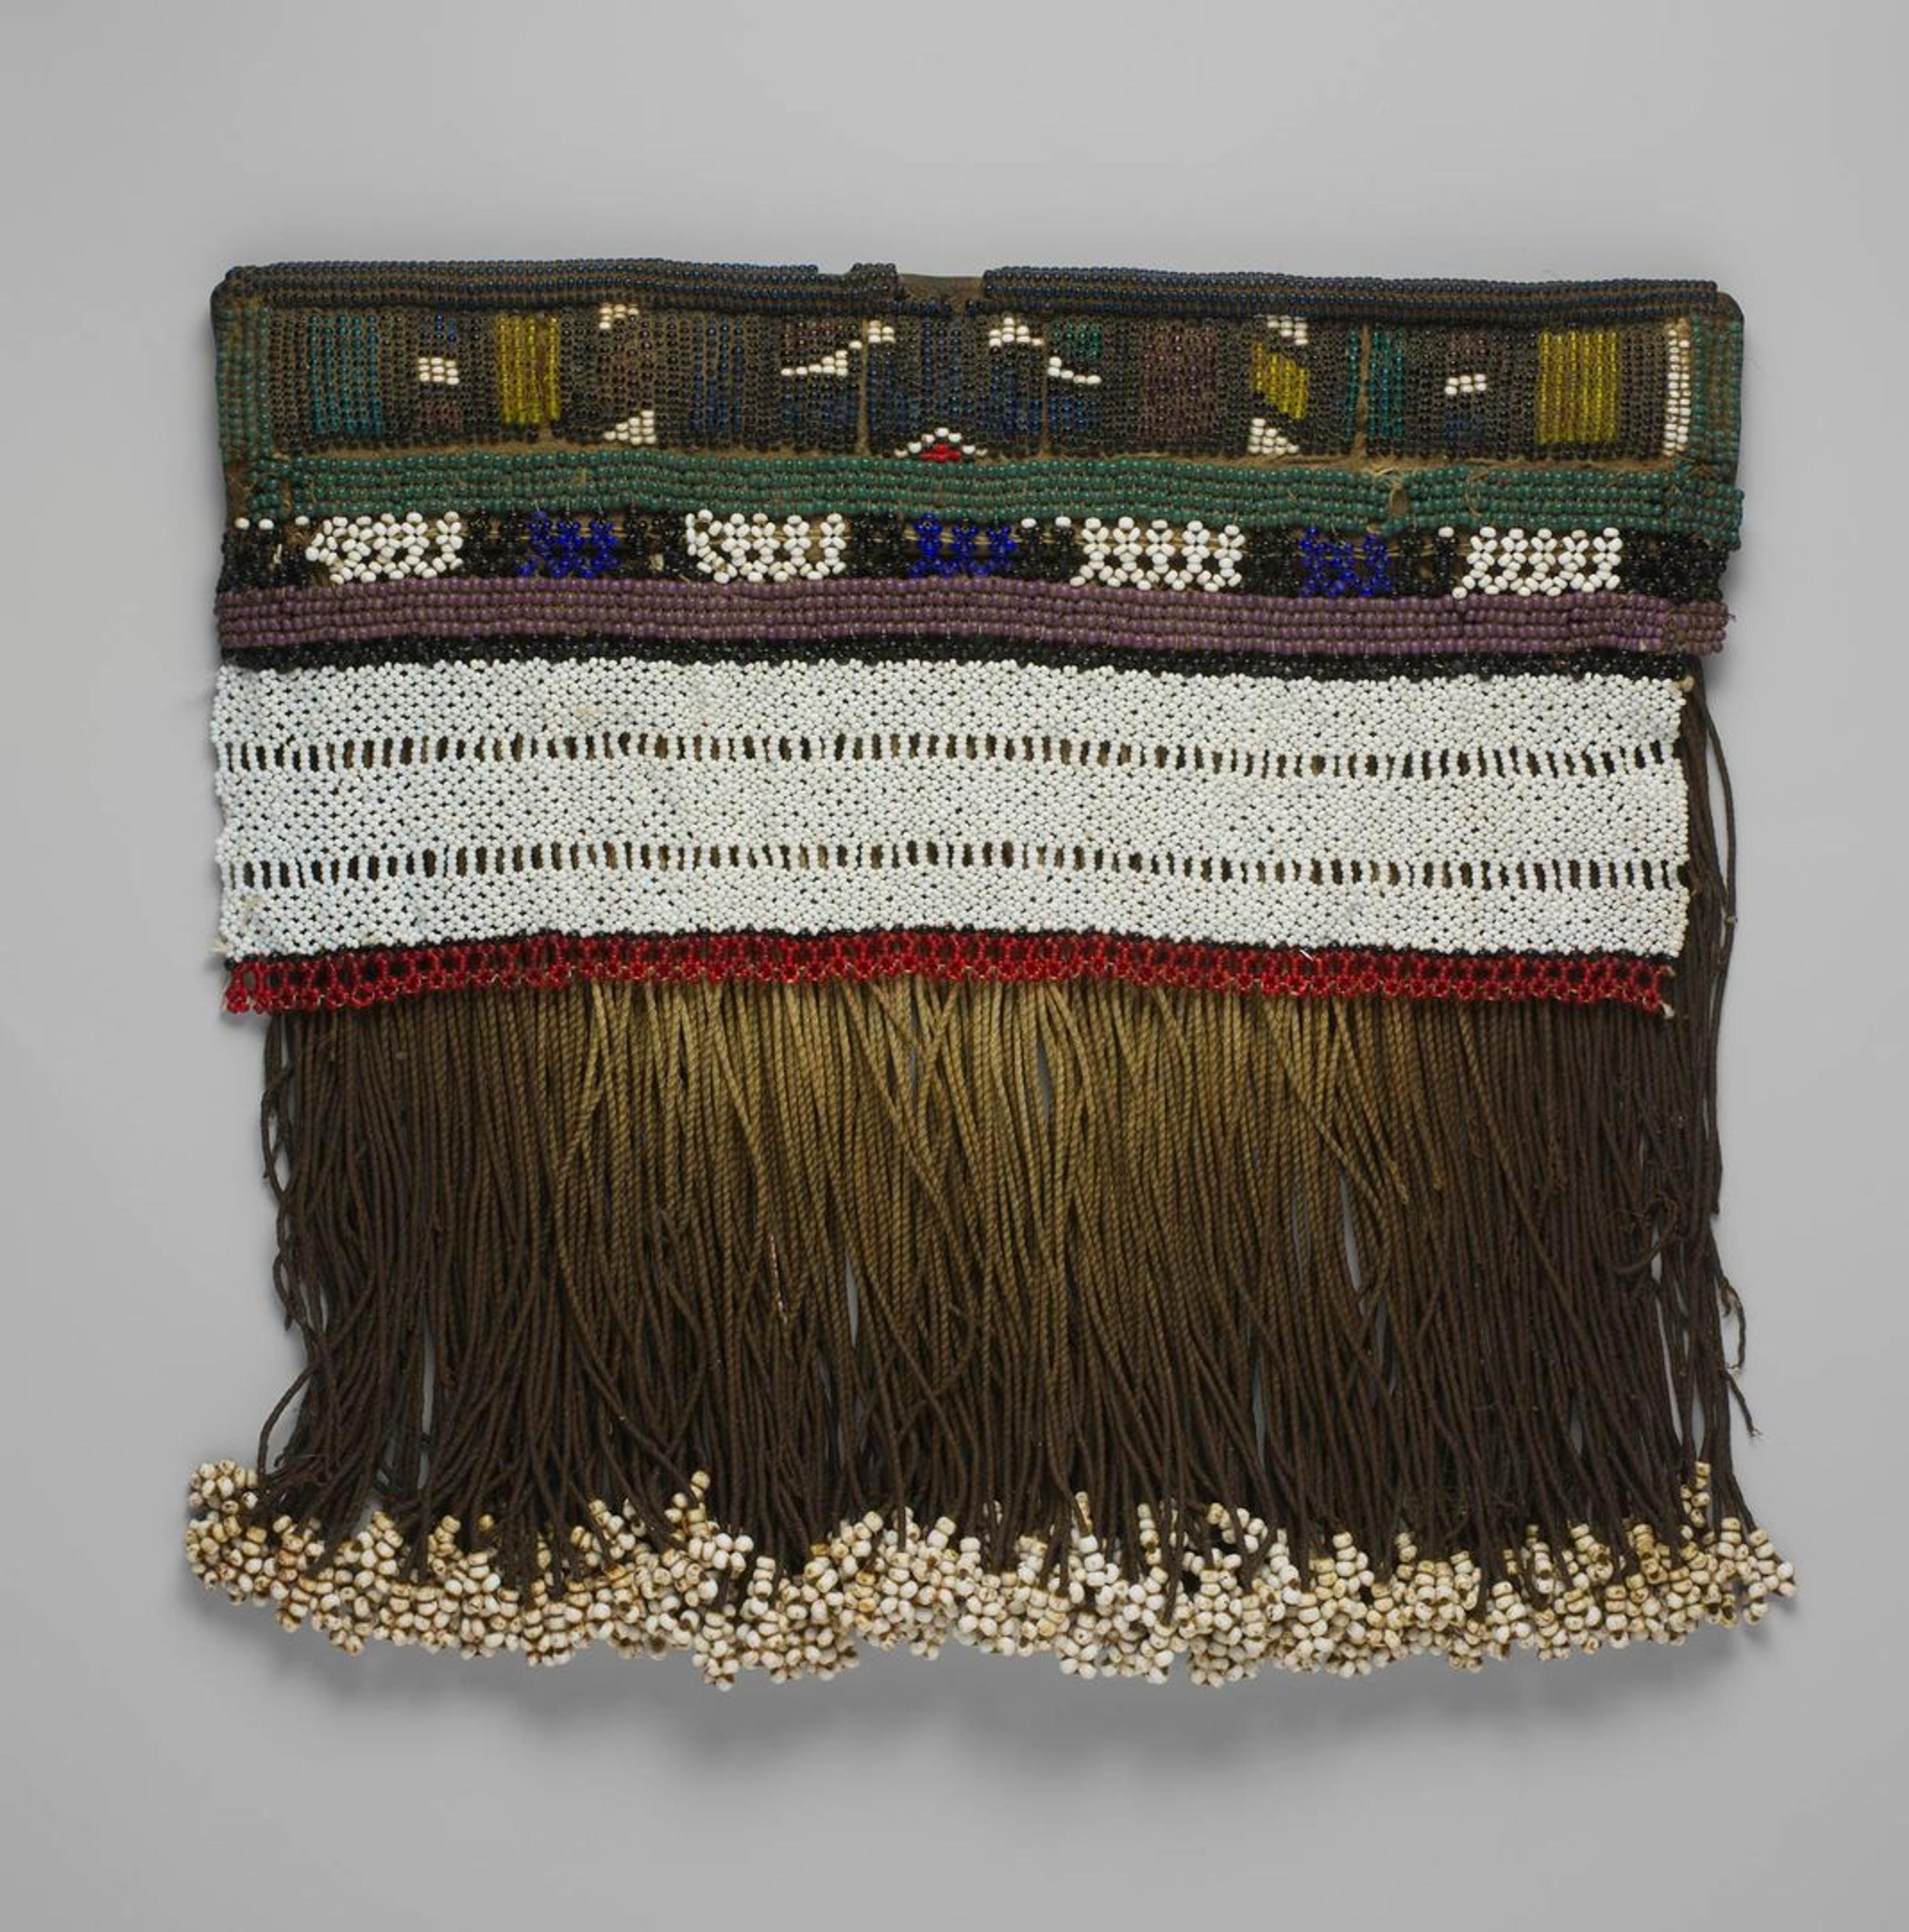 A girl's apron made by the Ndebele peoples of South Africa made of glass beads and hide